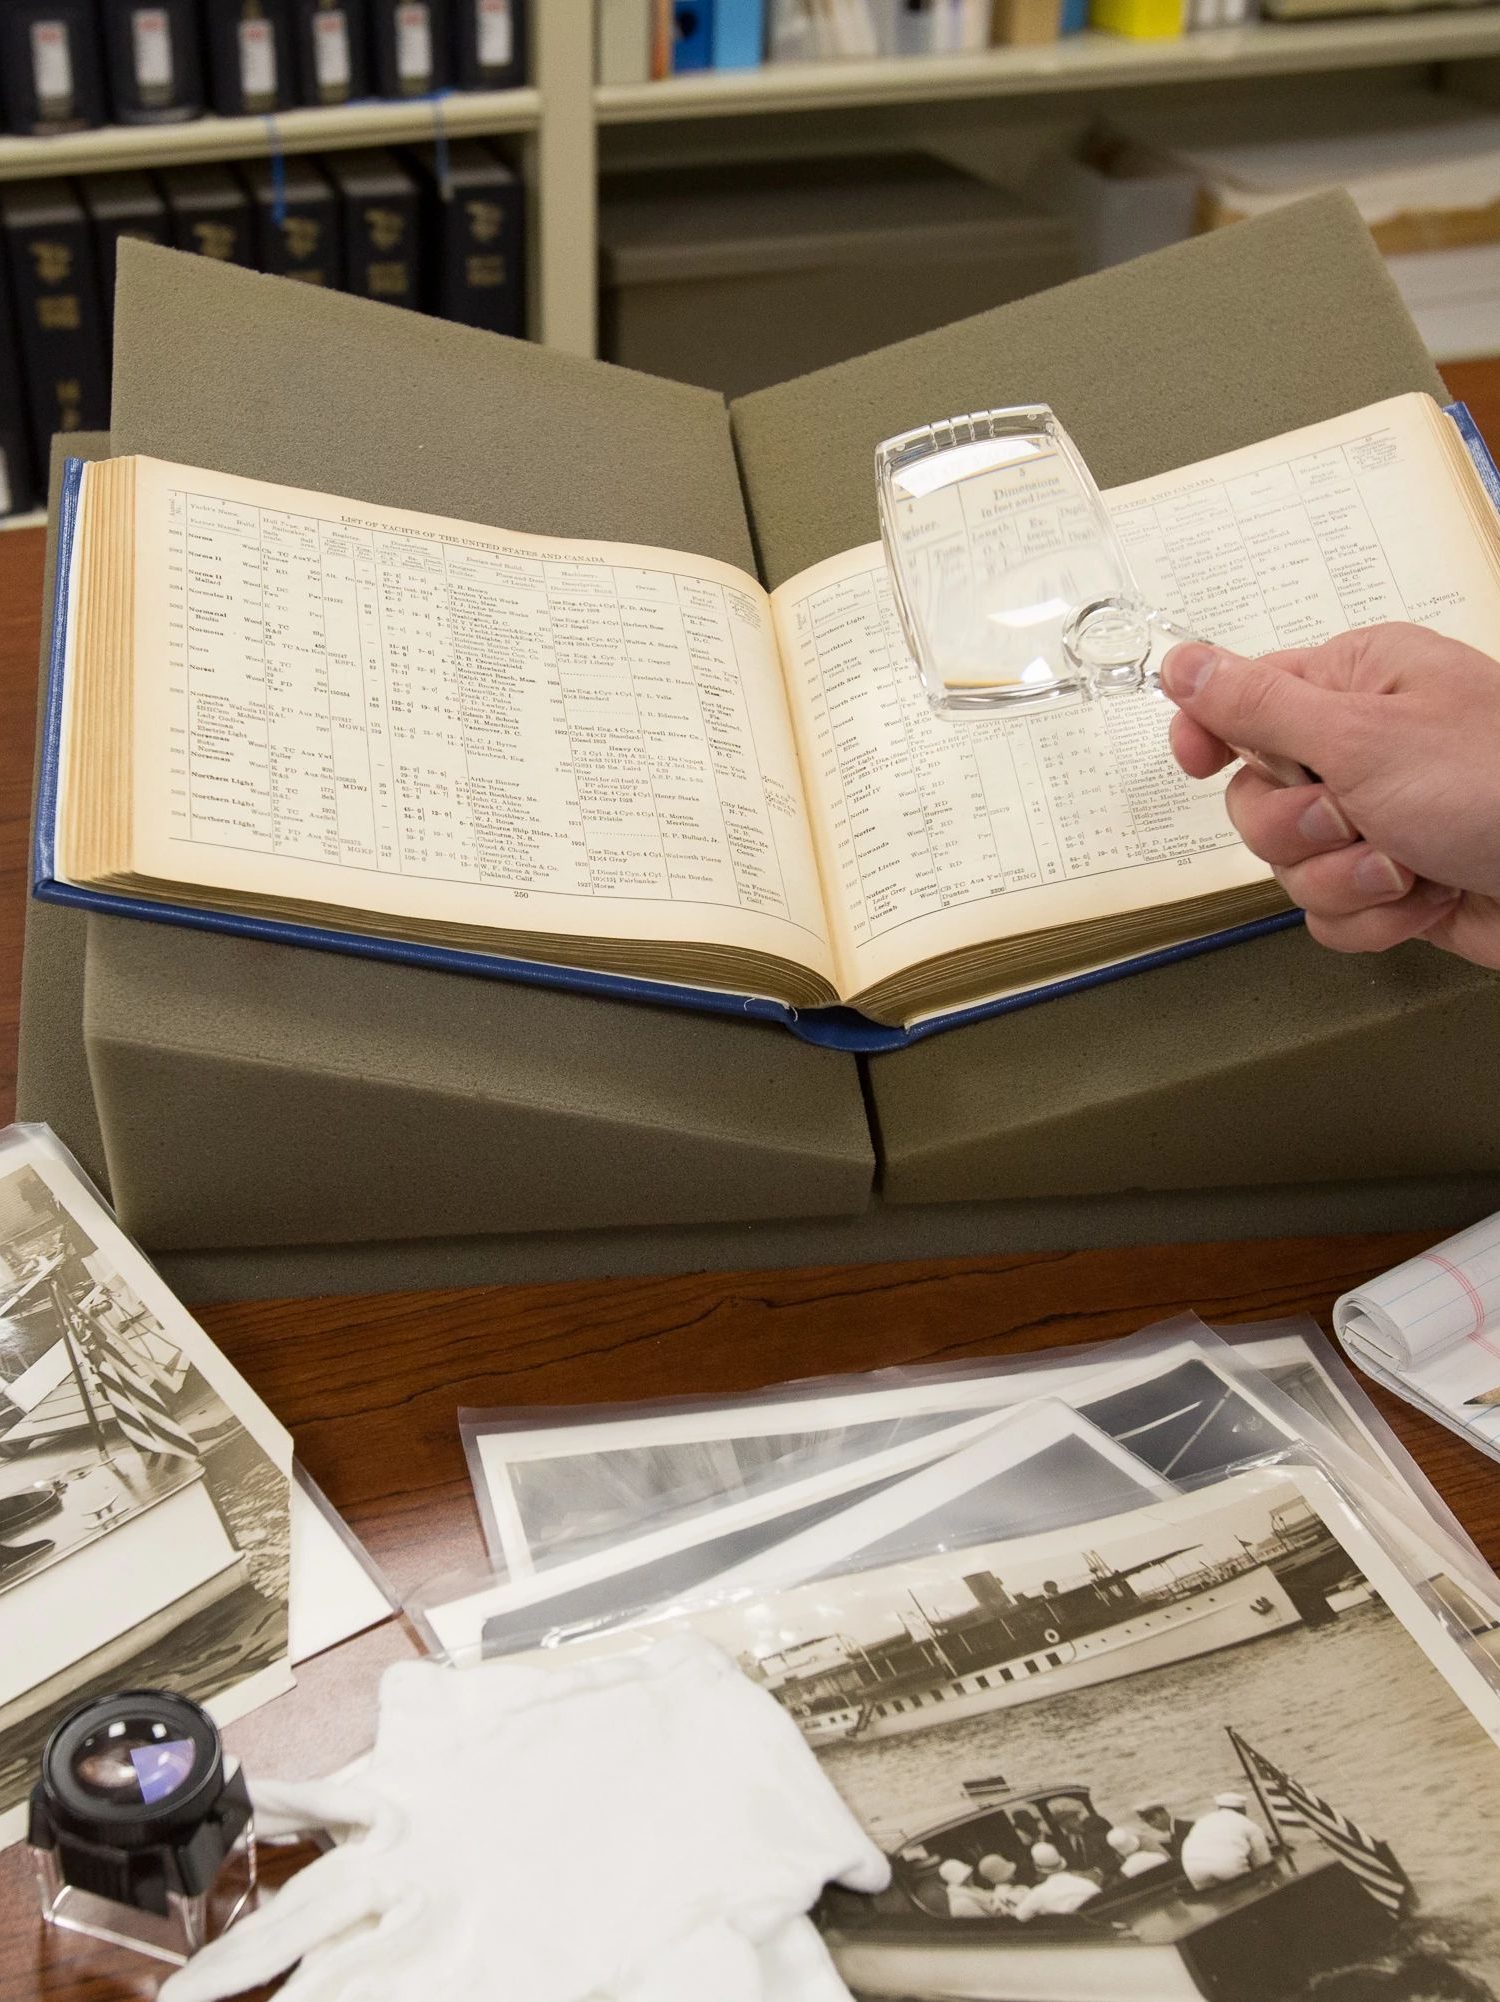 Color photo of a log book open on a table. A white persons hand is holding a magnifying glass. Black and white photos are spread out under the book. There is also a white glove and magnifying loop on the table. In the background is a bookshelf with books on it.